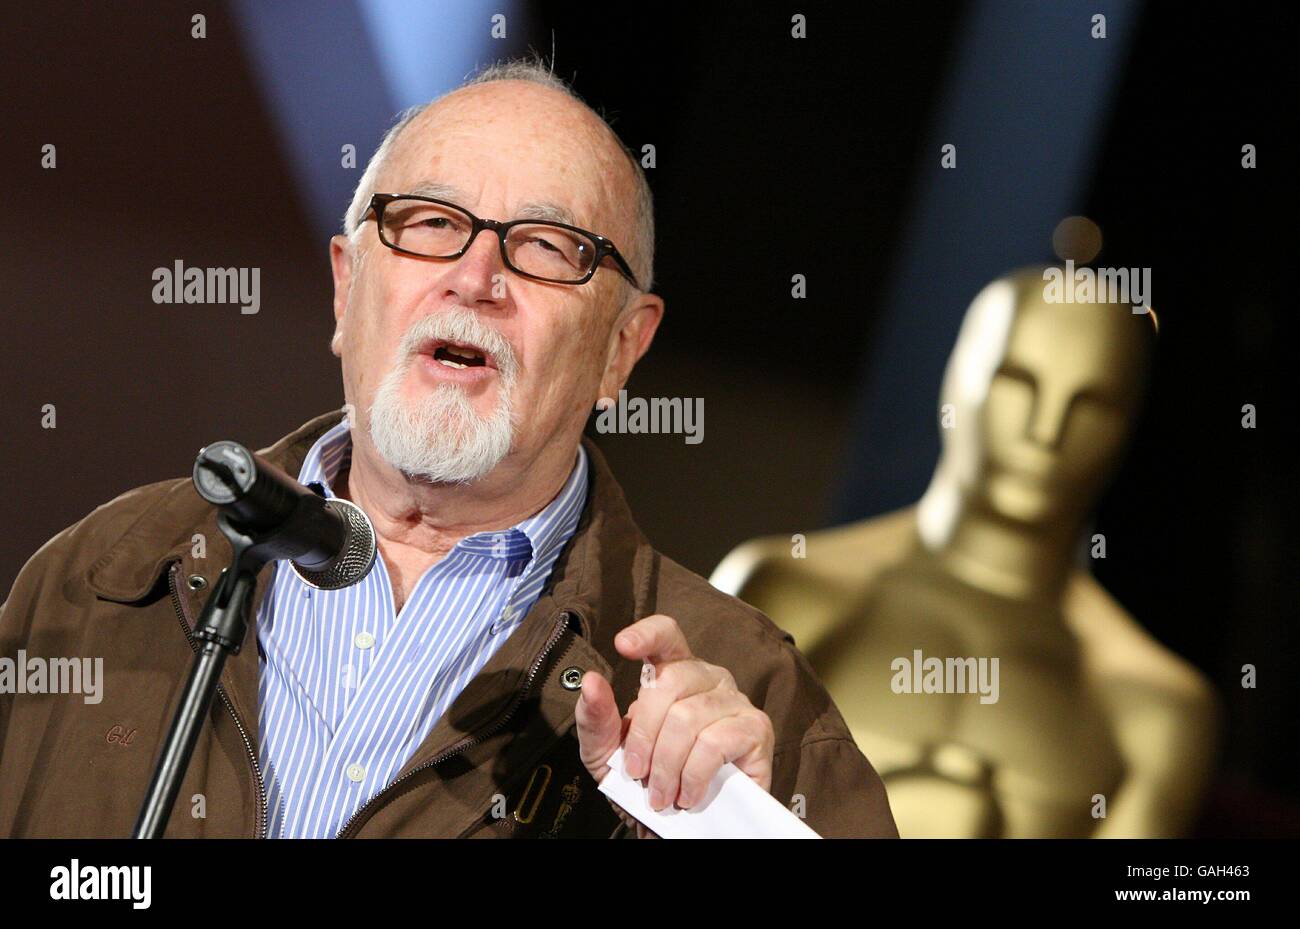 Gil Cates, telecast producer of the Oscars reveals the set for the 80th Academy Awards in Los Angeles. Stock Photo